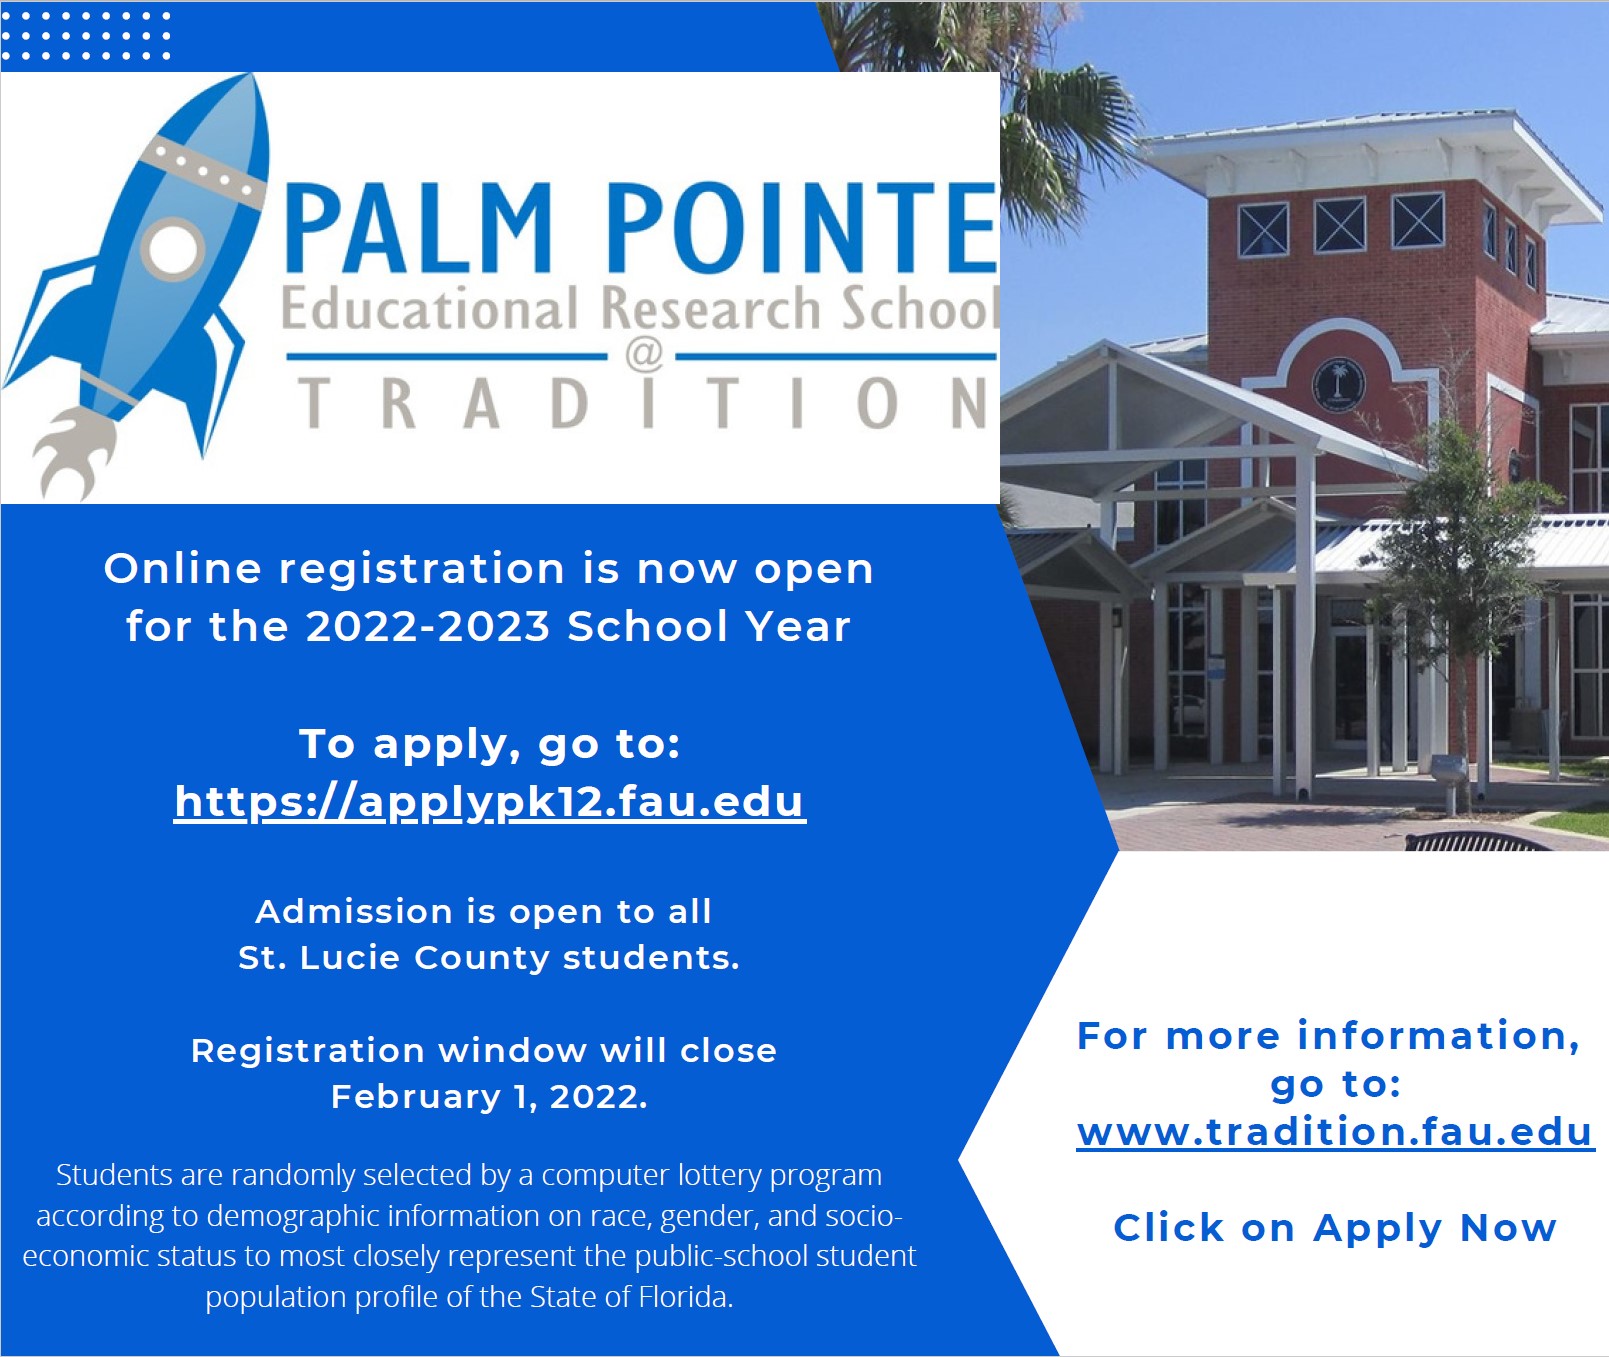 Online Registration is Now Open for the 2022-2023 School Year